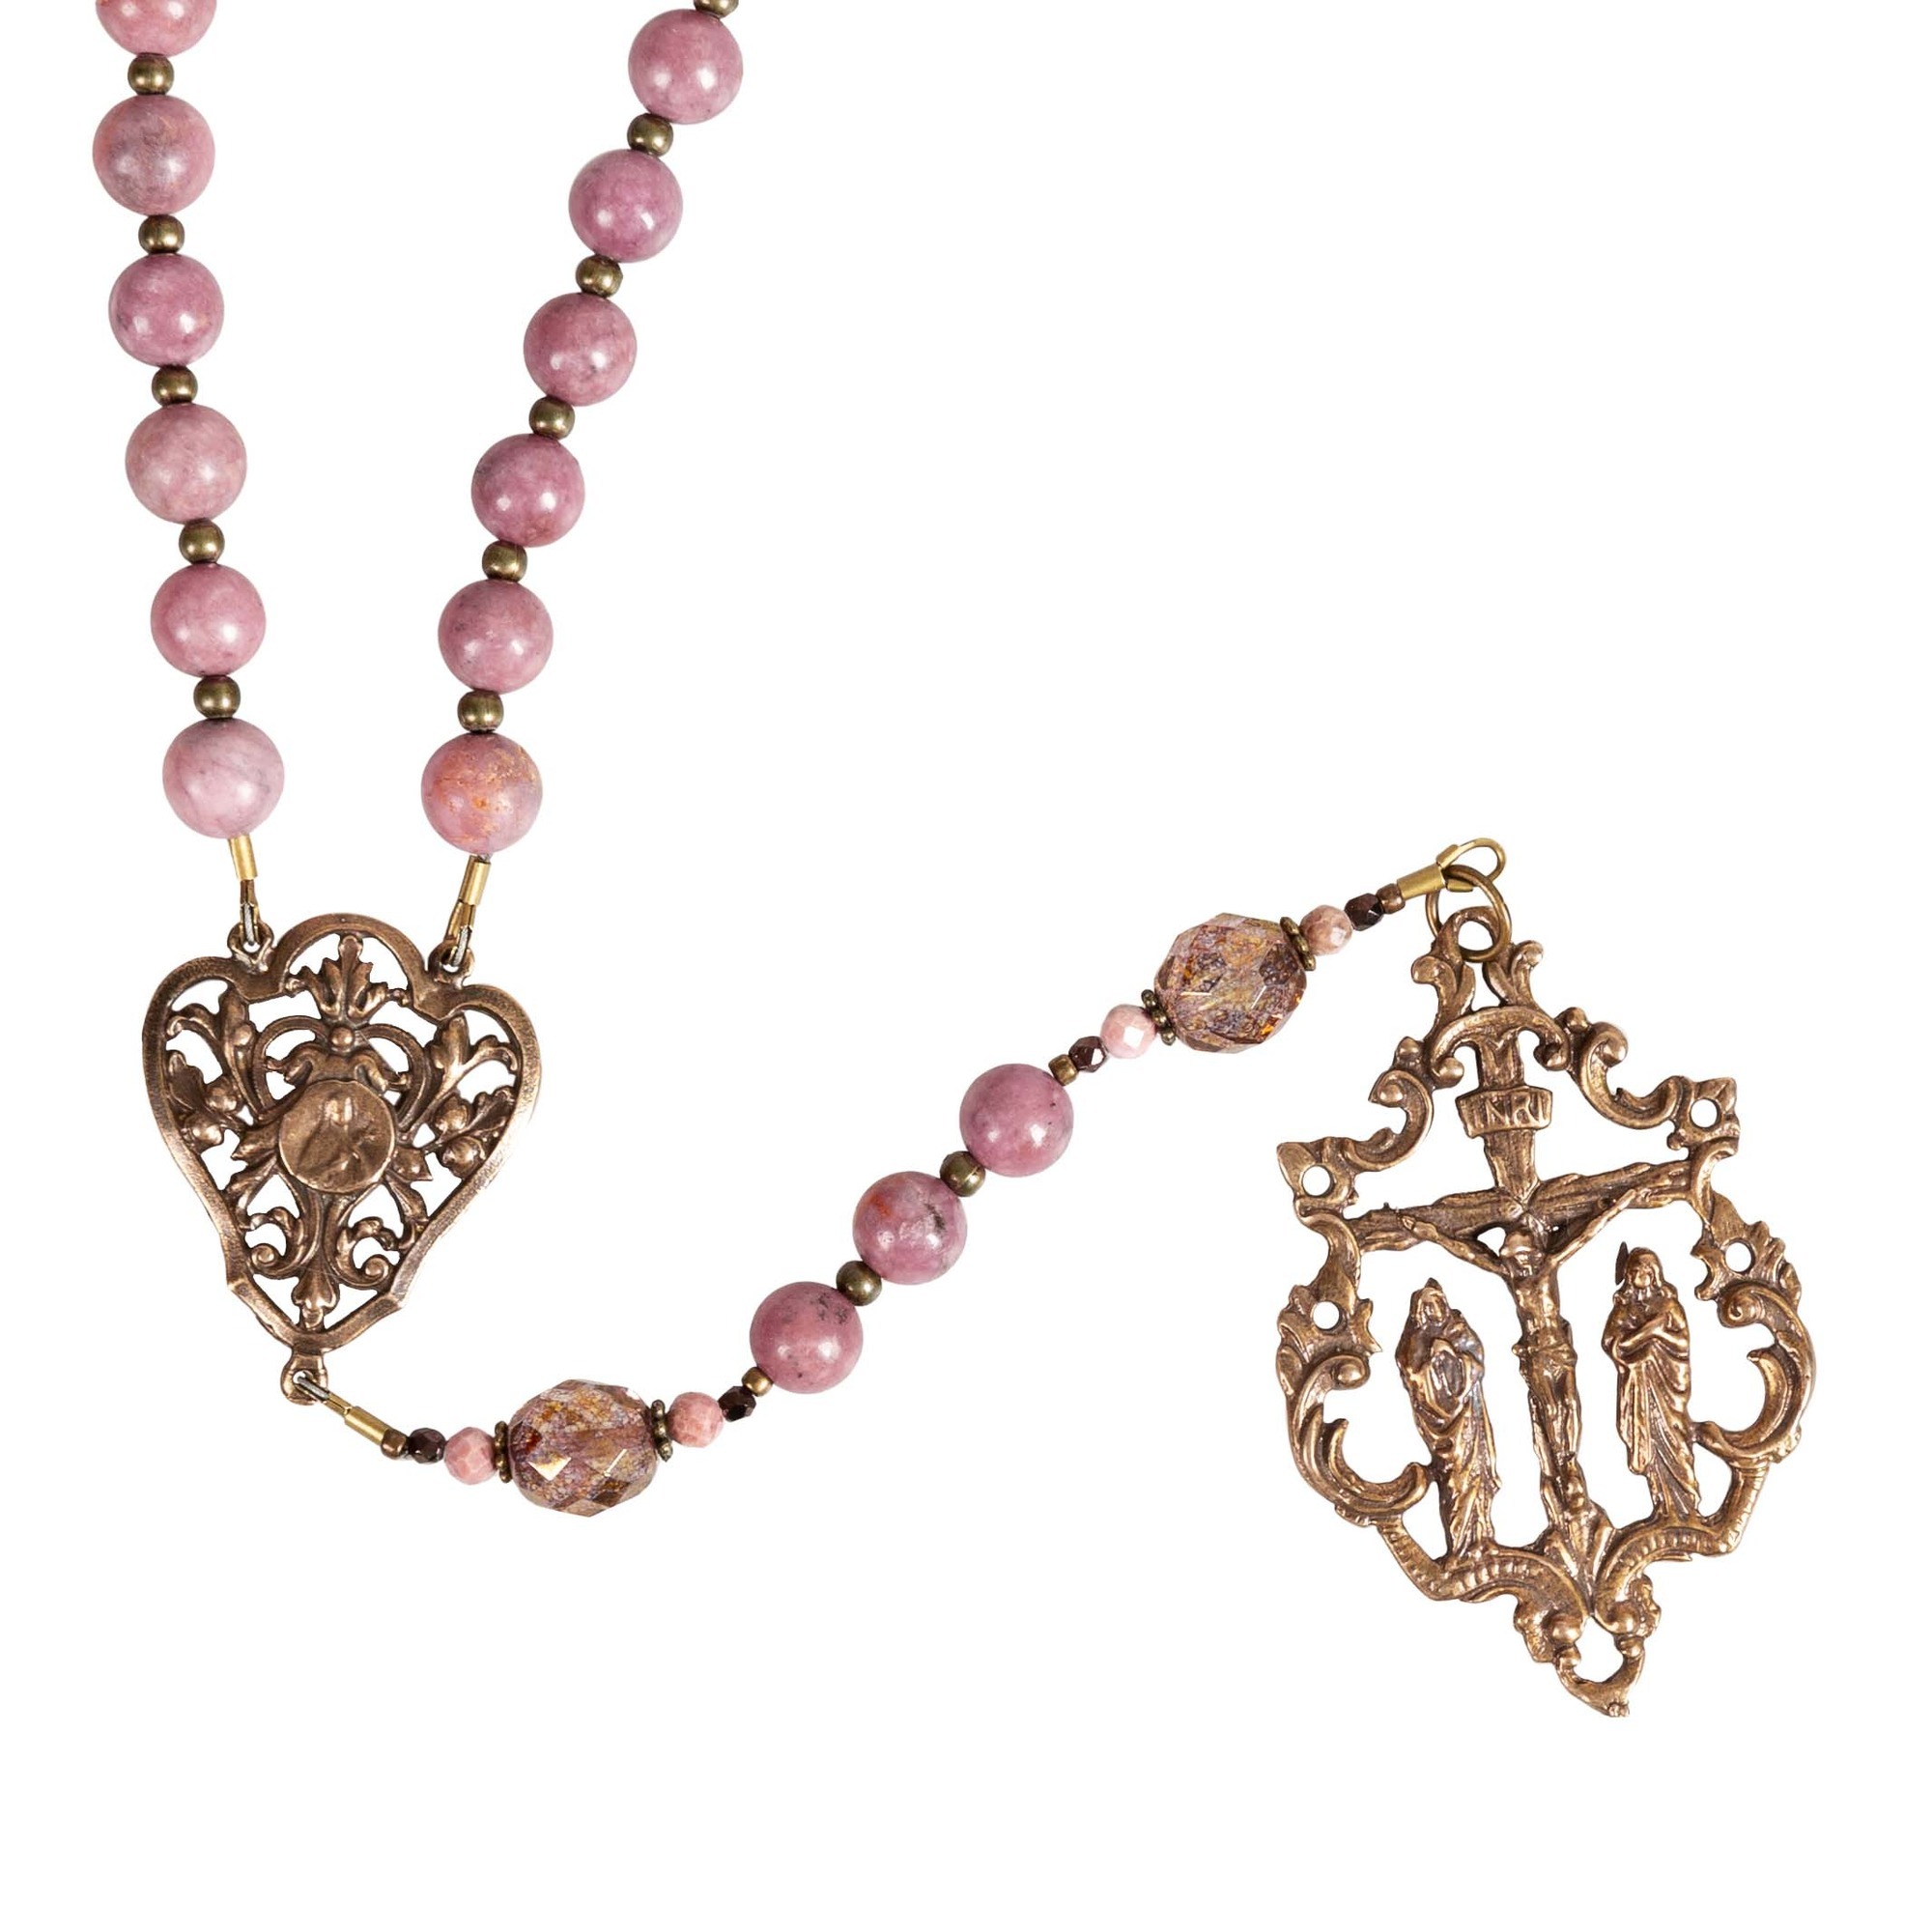 St. Therese Fire of Love Rosary | The Catholic Company®